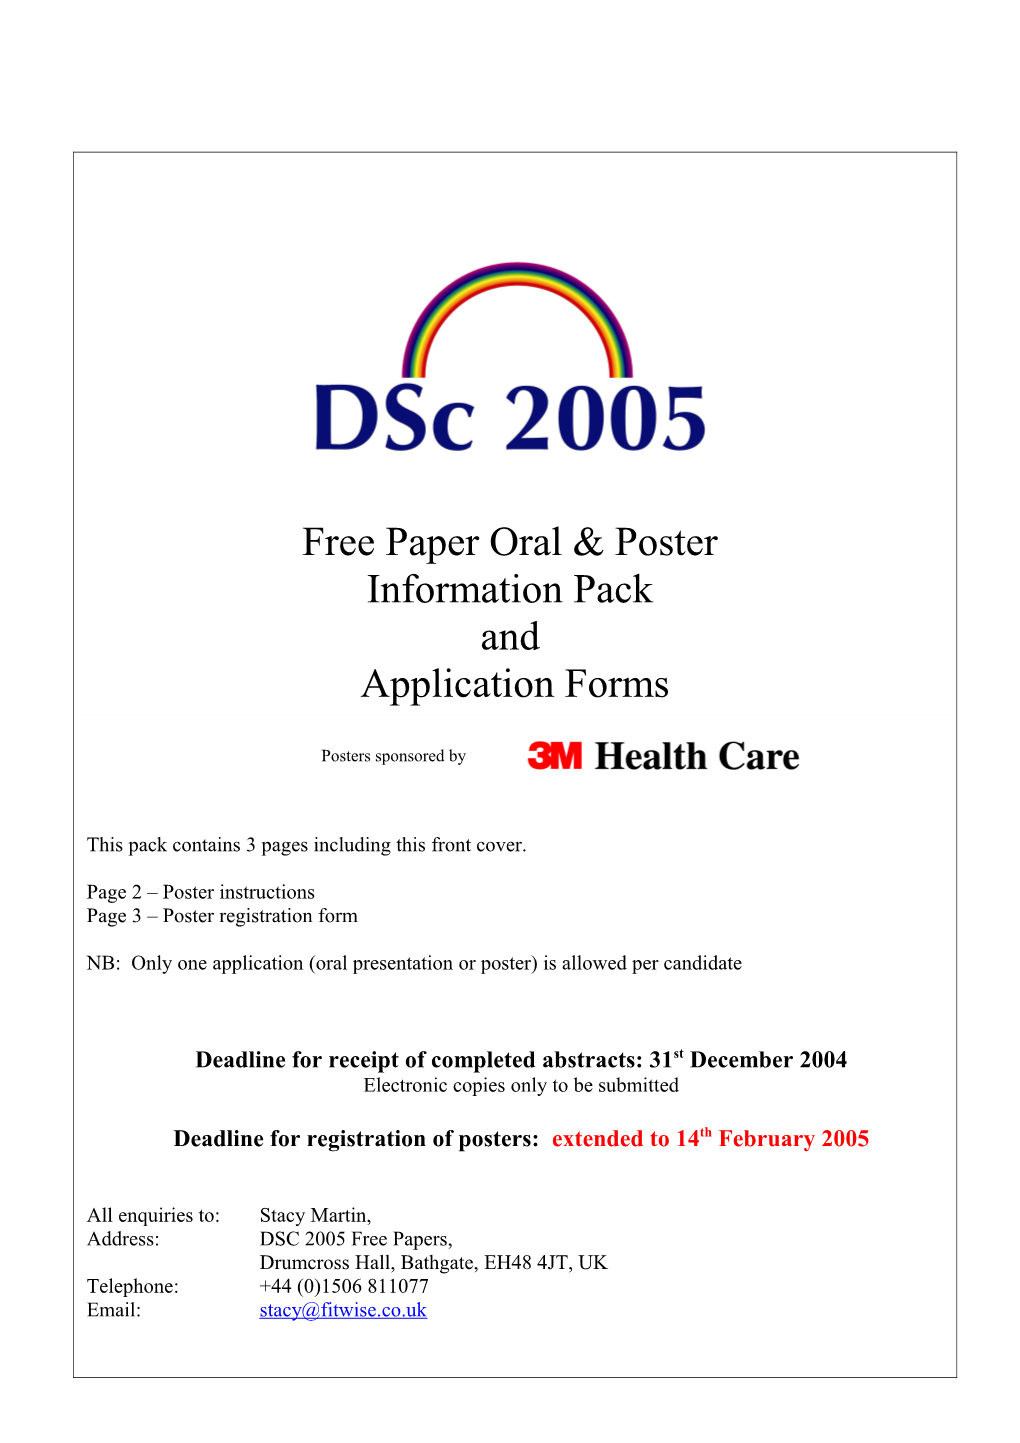 Dsc 2005- Free Paper Oral & Poster Information Pack and Application Forms